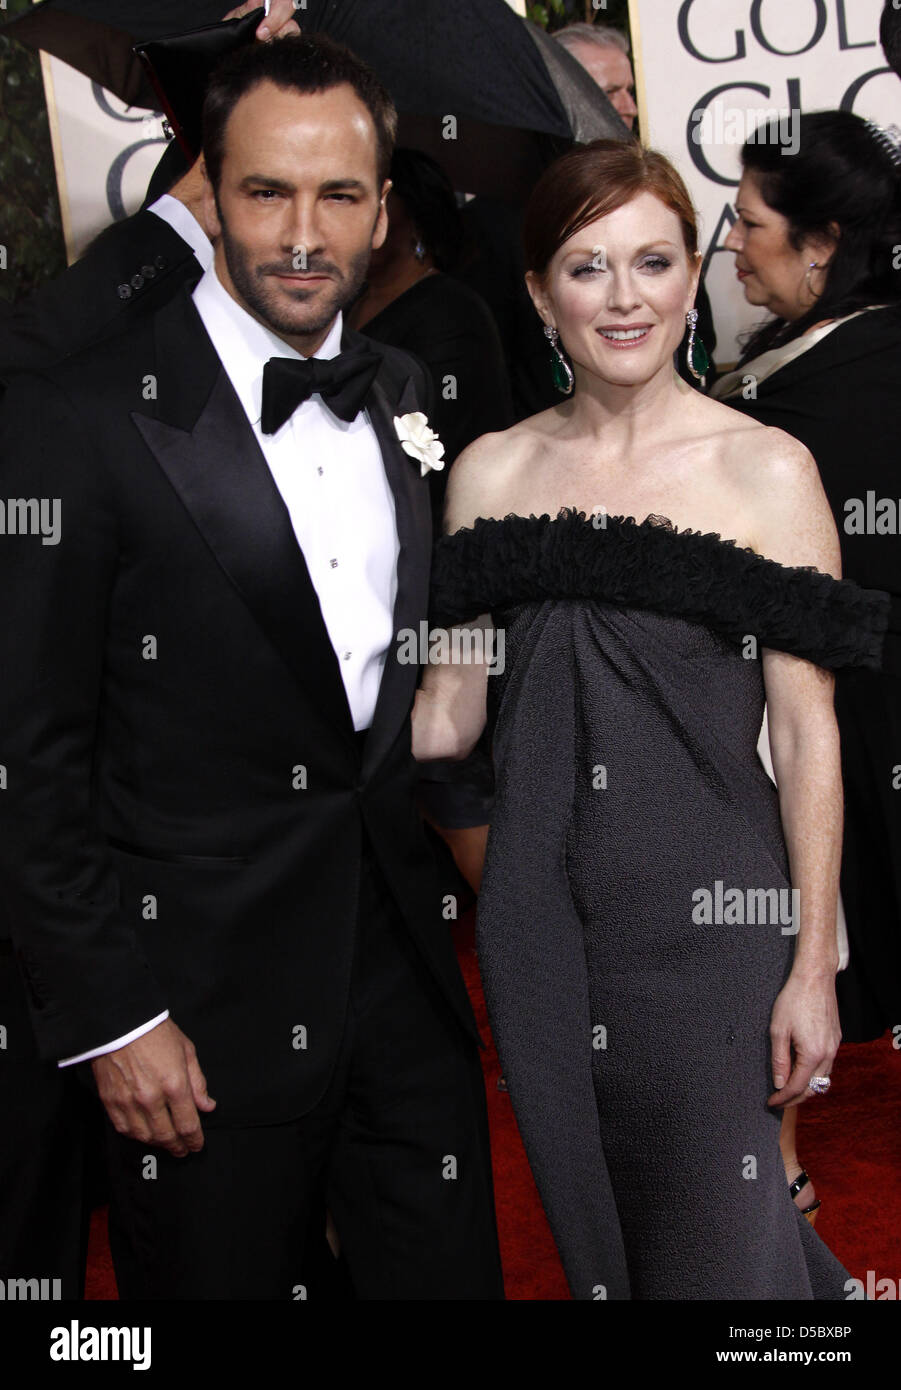 US fashion designer and director Tom Ford and US actress Julianne Moore  arrive for the 67th Golden Globe Awards in Los Angeles, USA, 17 January  2010. The Globes honour excellence in cinema